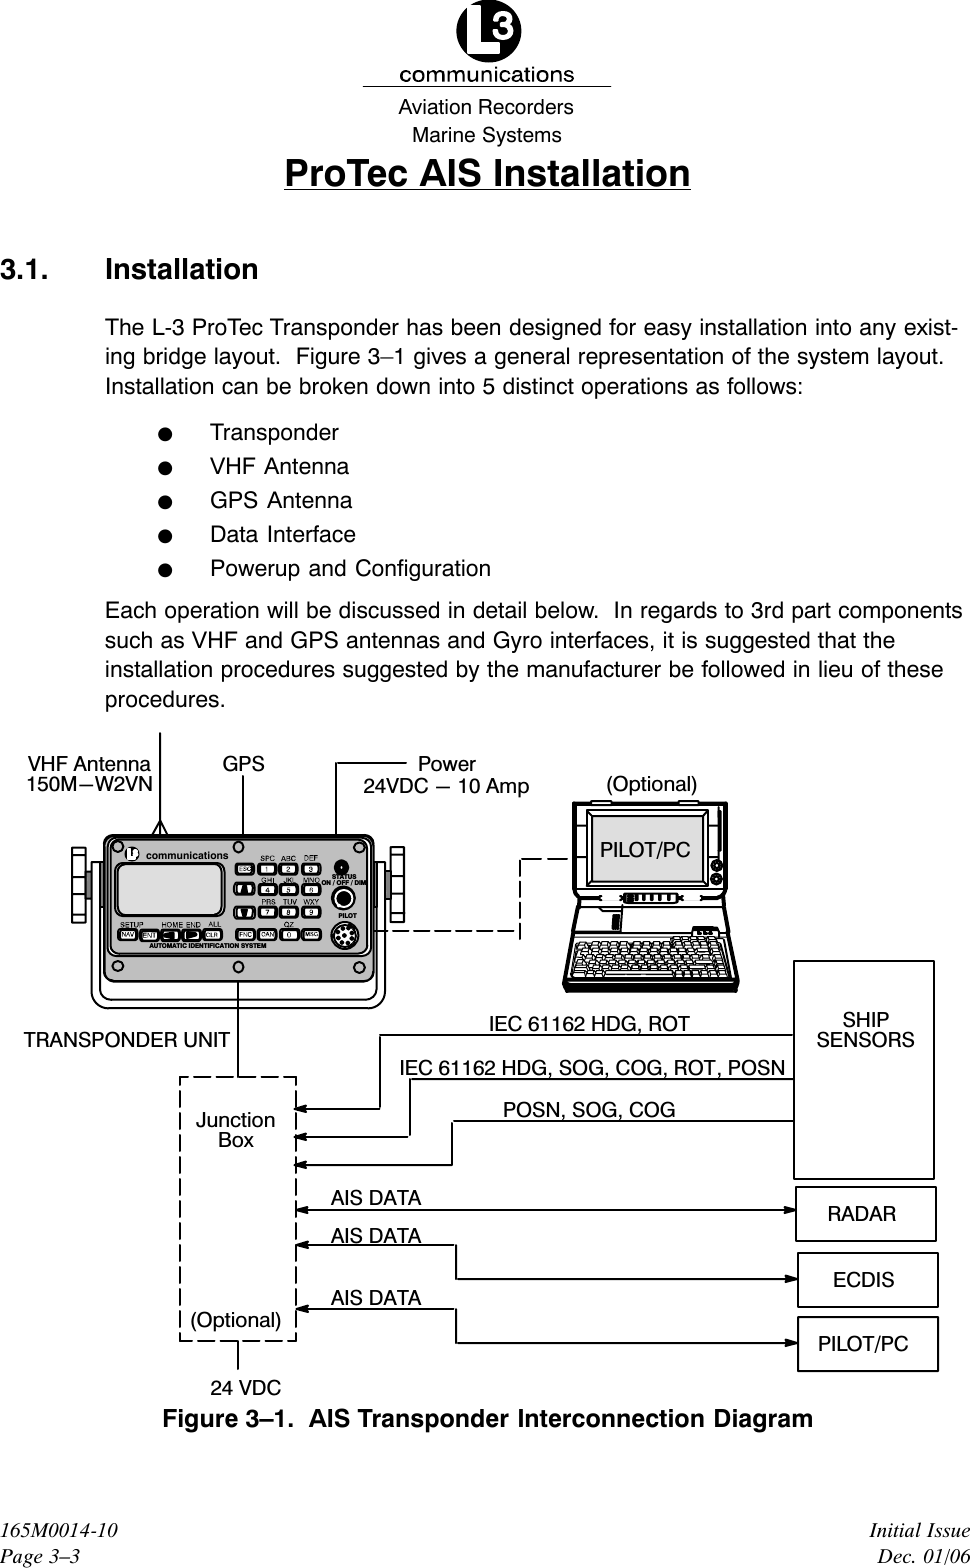 Marine SystemsAviation RecordersInitial IssueDec. 01/06165M0014-10Page 3–3ProTec AIS Installation3.1. InstallationThe L-3 ProTec Transponder has been designed for easy installation into any exist-ing bridge layout.  Figure 3–1 gives a general representation of the system layout.Installation can be broken down into 5 distinct operations as follows:FTransponderFVHF AntennaFGPS AntennaFData InterfaceFPowerup and ConfigurationEach operation will be discussed in detail below.  In regards to 3rd part componentssuch as VHF and GPS antennas and Gyro interfaces, it is suggested that the installation procedures suggested by the manufacturer be followed in lieu of these procedures.JunctionBoxIEC 61162 HDG, ROTTRANSPONDER UNITIEC 61162 HDG, SOG, COG, ROT, POSNPOSN, SOG, COGSHIPSENSORS(Optional)RADARECDISPILOT/PCAIS DATAAIS DATAAIS DATAVHF Antenna150M-W2VNGPS24VDC - 10 AmpPowerPILOT/PC24 VDC(Optional)communicationsPILOTAUTOMATIC IDENTIFICATION SYSTEMSTATUSON / OFF / DIMFigure 3–1.  AIS Transponder Interconnection Diagram